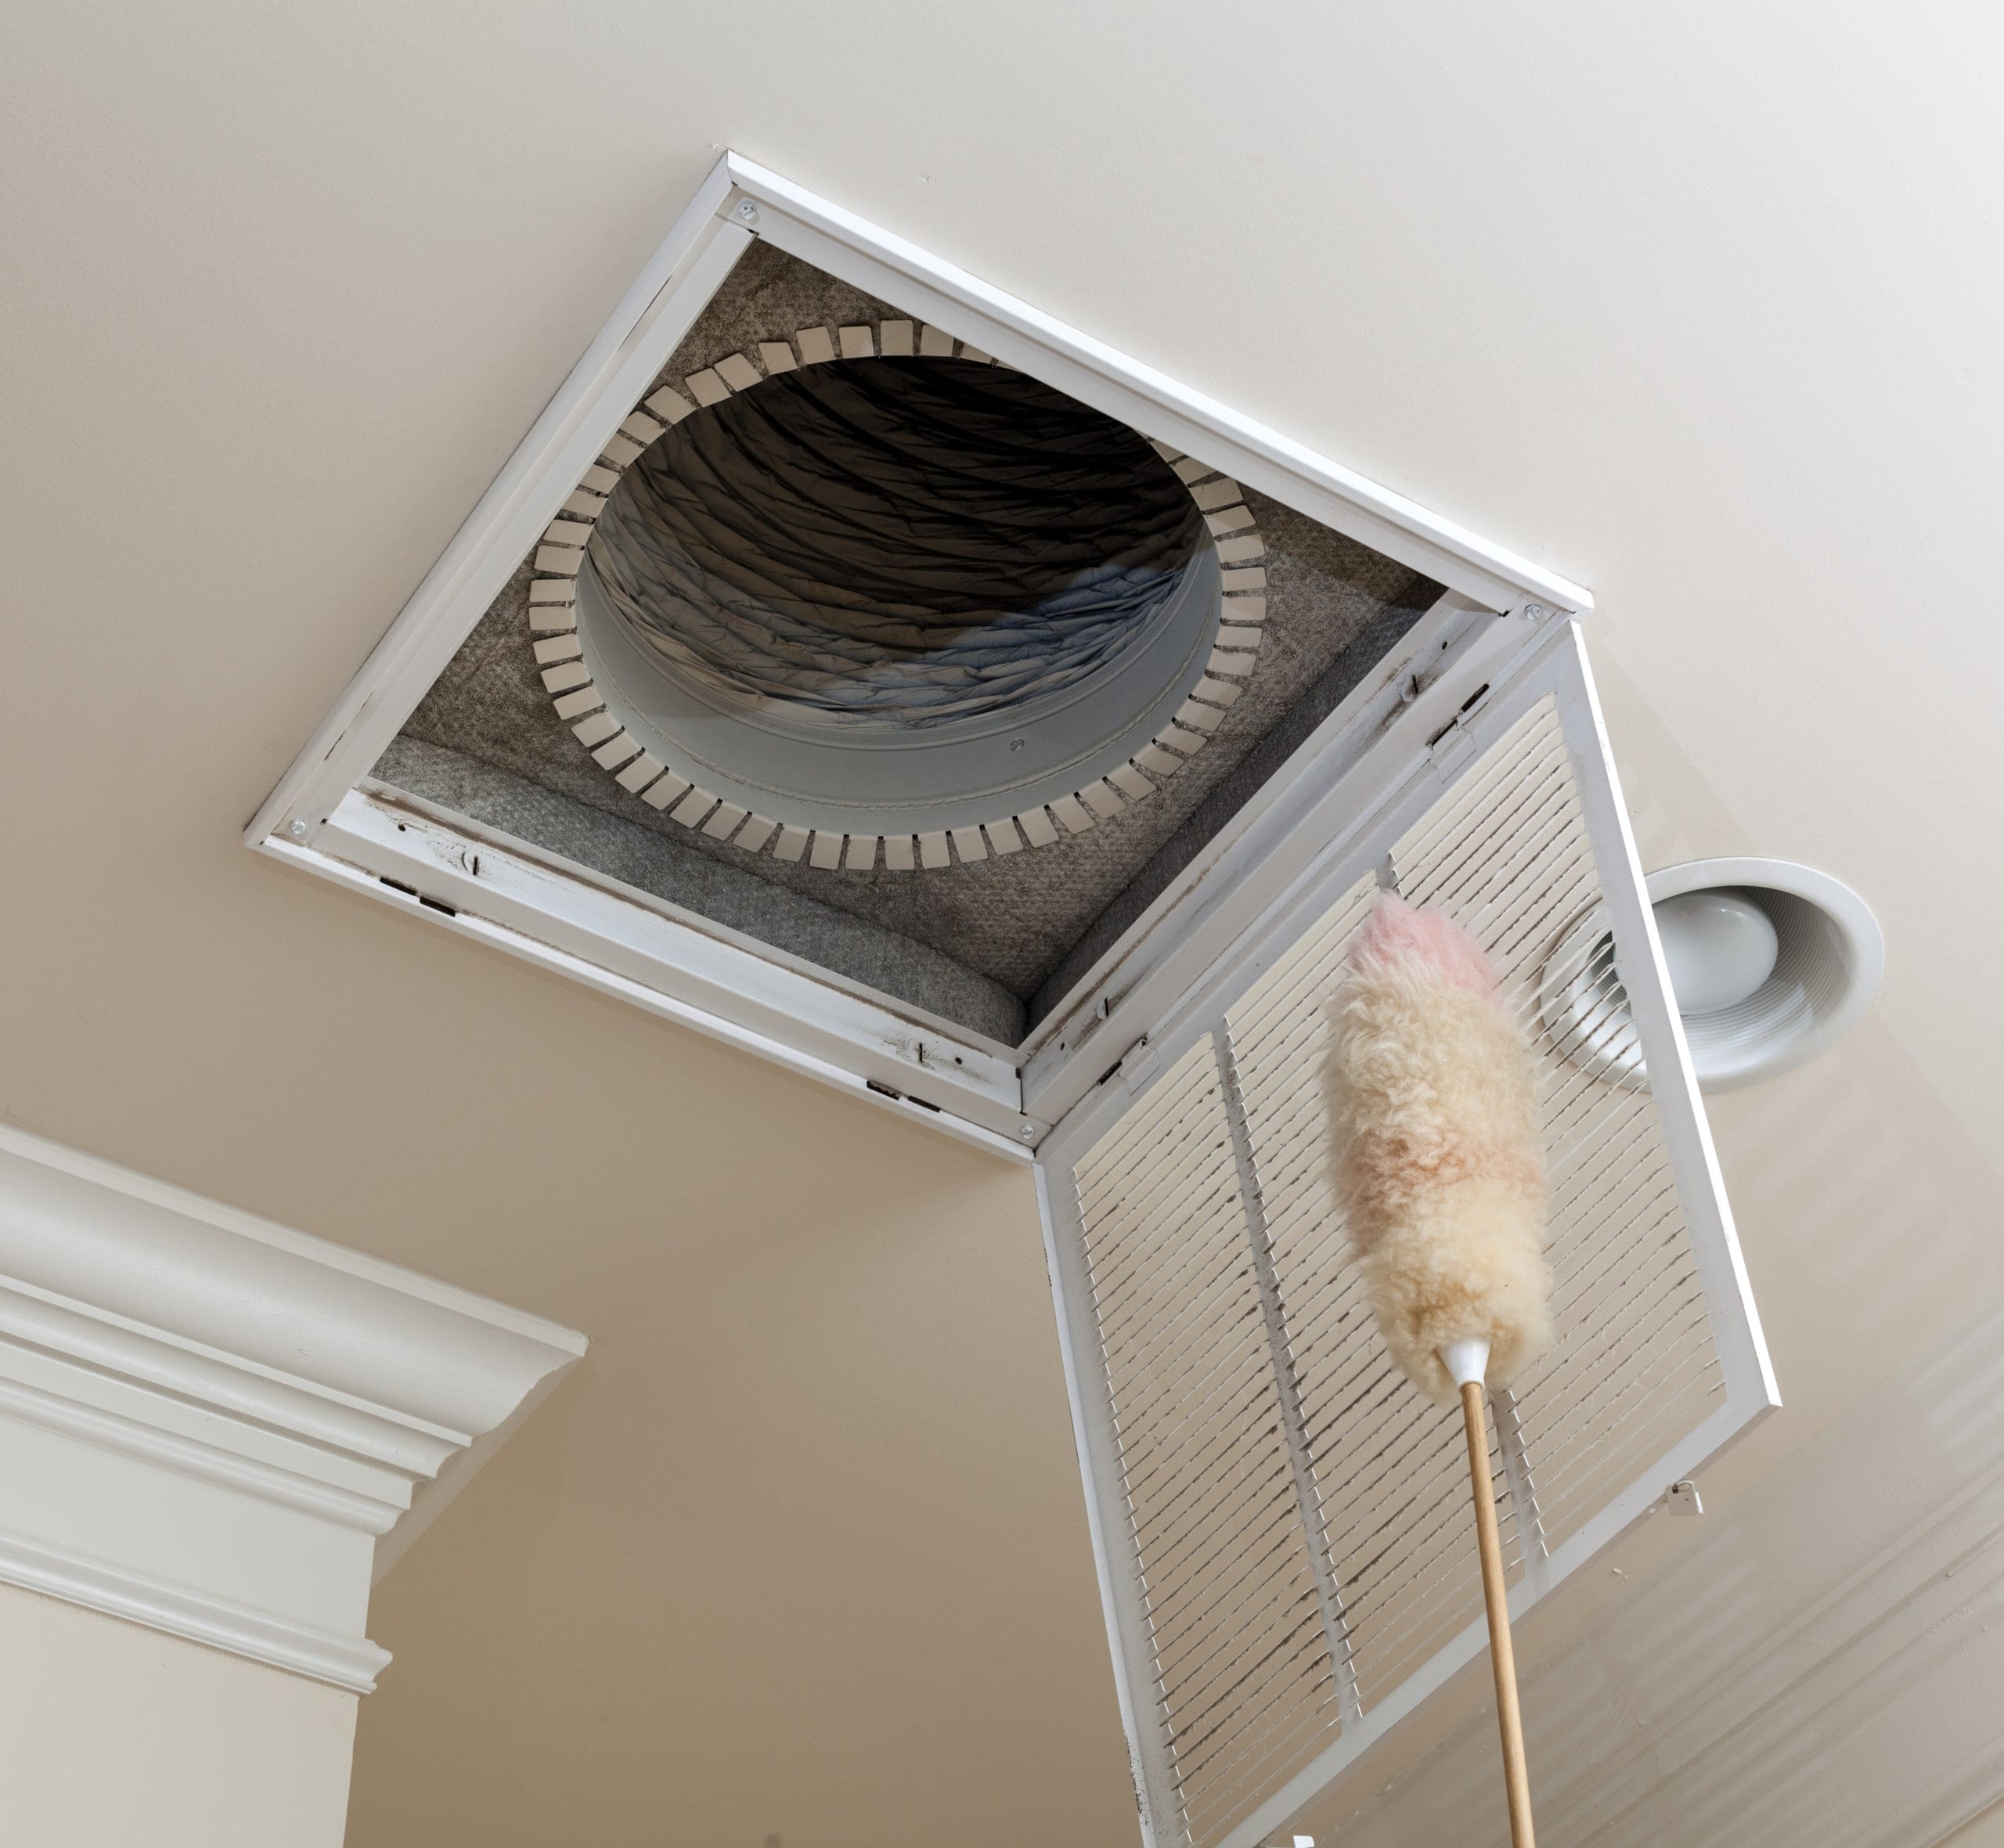 clean your air ducts